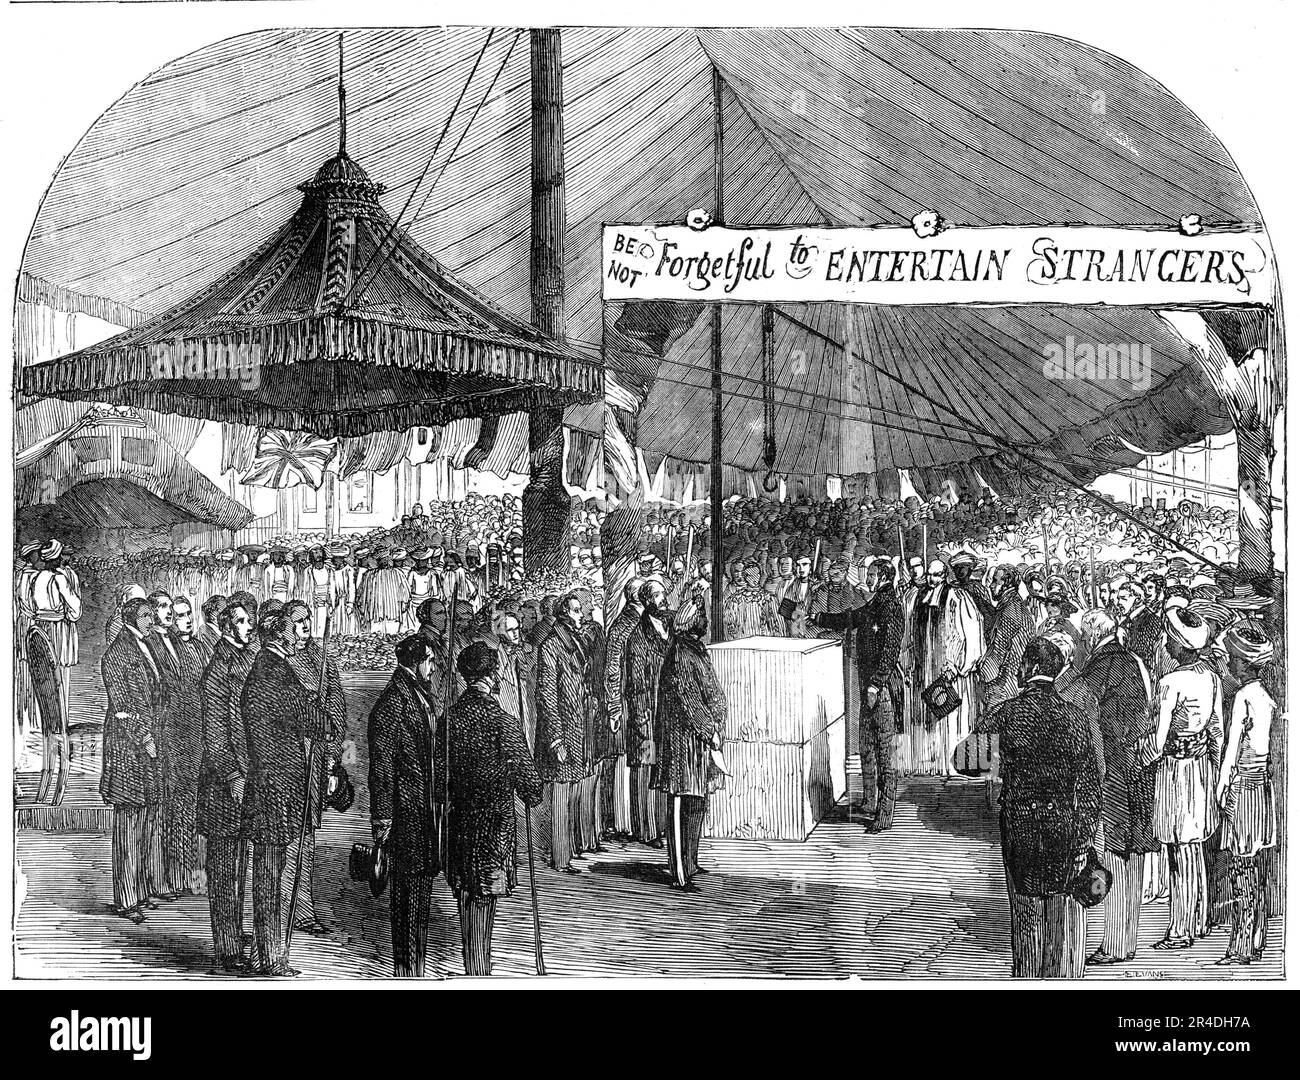 His Royal Highness Prince Albert laying the Foundation-Stone of the Strangers' Home, near Limehouse Church, 1856. Founding of a building '...affording all the comforts and advantages of a home to natives of India, Arabia, Africa, China, the Straits of Malacca, the Mozambique, and the Islands of the South Pacific, who may require them during their temporary sojourn in London. [It would address the] utterly wretched condition of many of the Lascar seamen and others from kindred climes - friendless, homeless, and destitute - in a country far distant from their own, speaking a language altogether Stock Photo